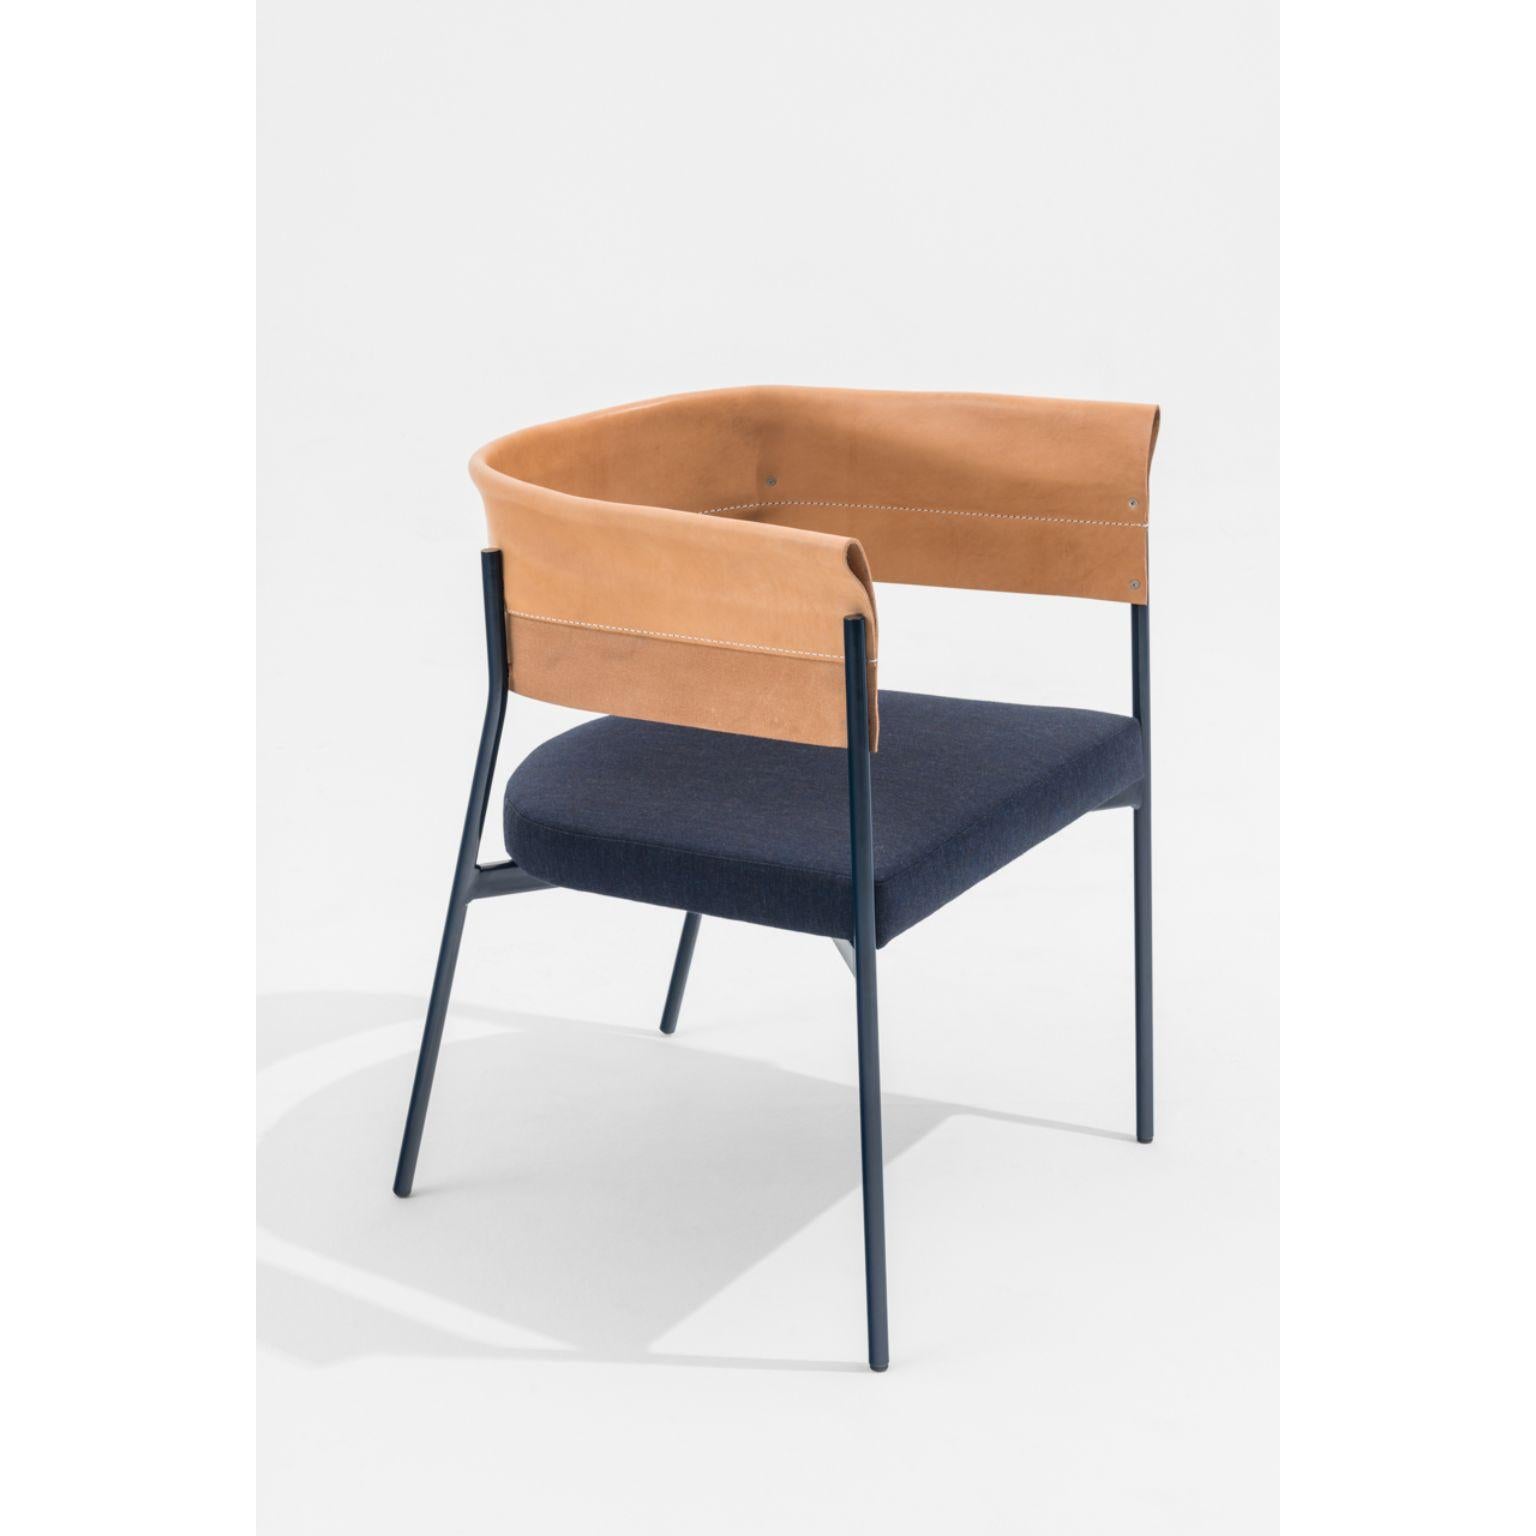 Gomito armhair by SEM
Dimensions: W61 x D50 x H72 cm
Material: Lacquered hand-welved steel frame in colours, Backrest in precious folded and sewn leather, Upholstered seat in fabric Canvas 2 by Kvadrat.
Also available in different colours.